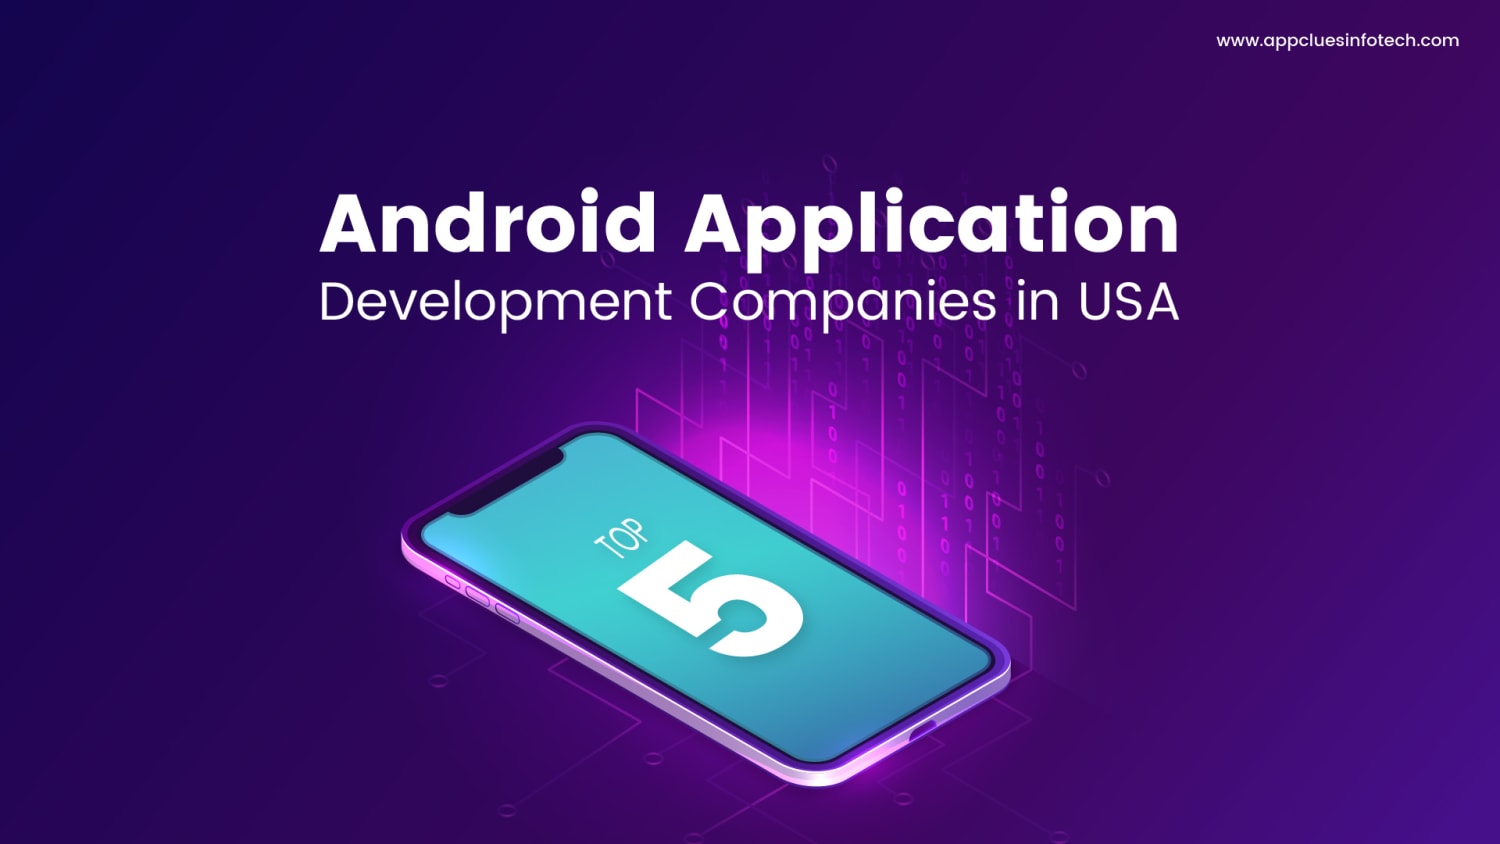 Top 5 Android Application Development Companies in USA